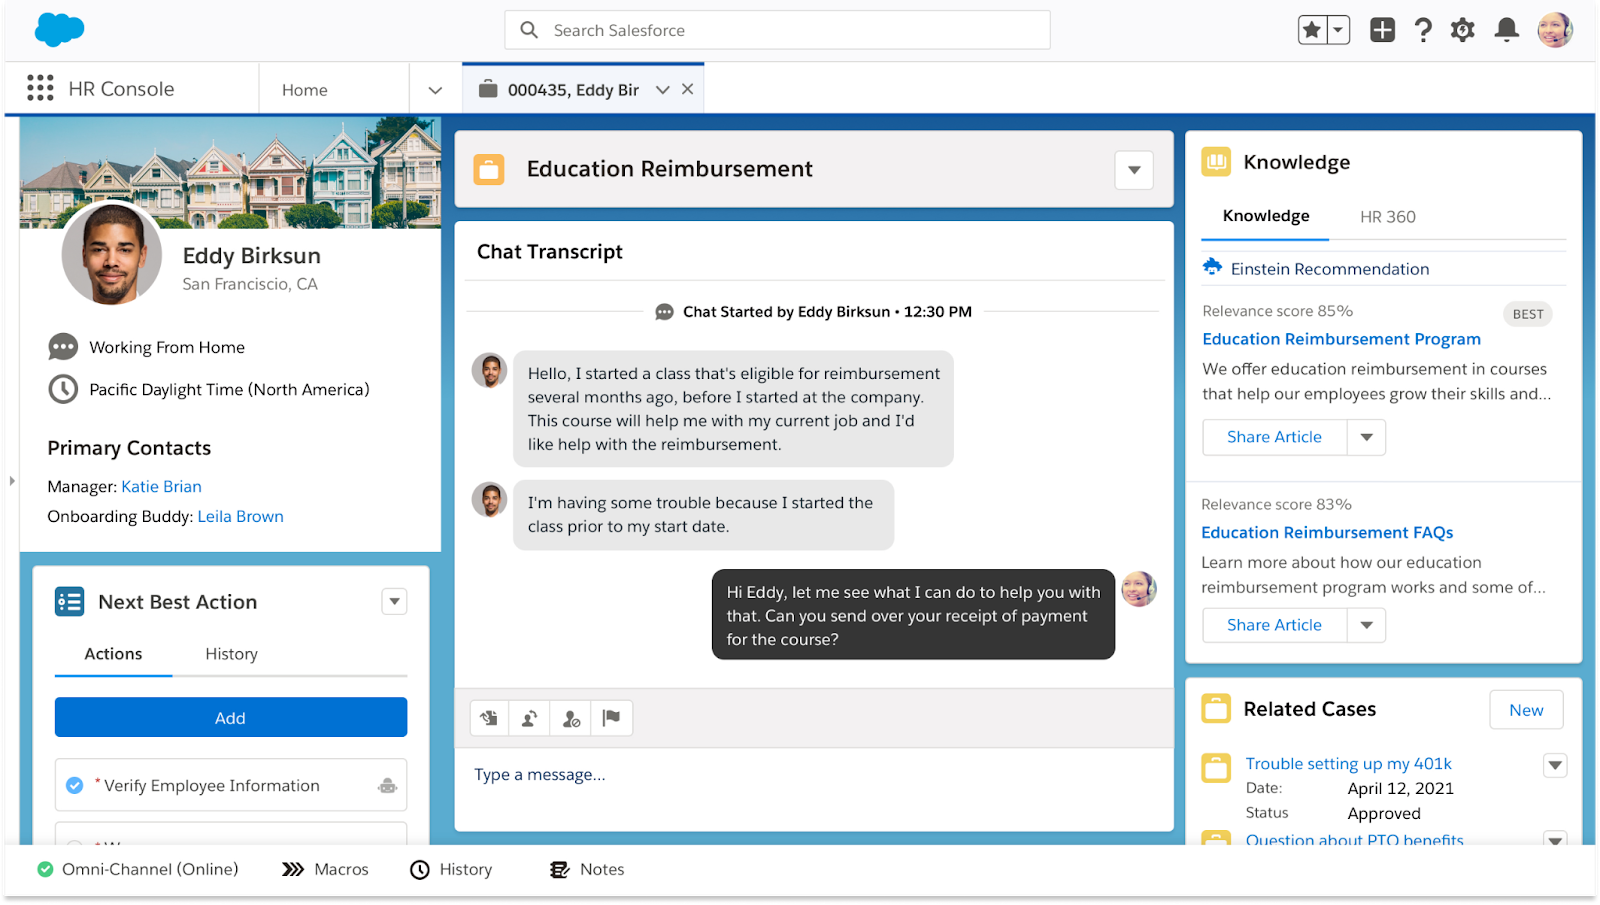 Salesforce’s New HR Service Center Reduces Friction for the Hybrid Workforce